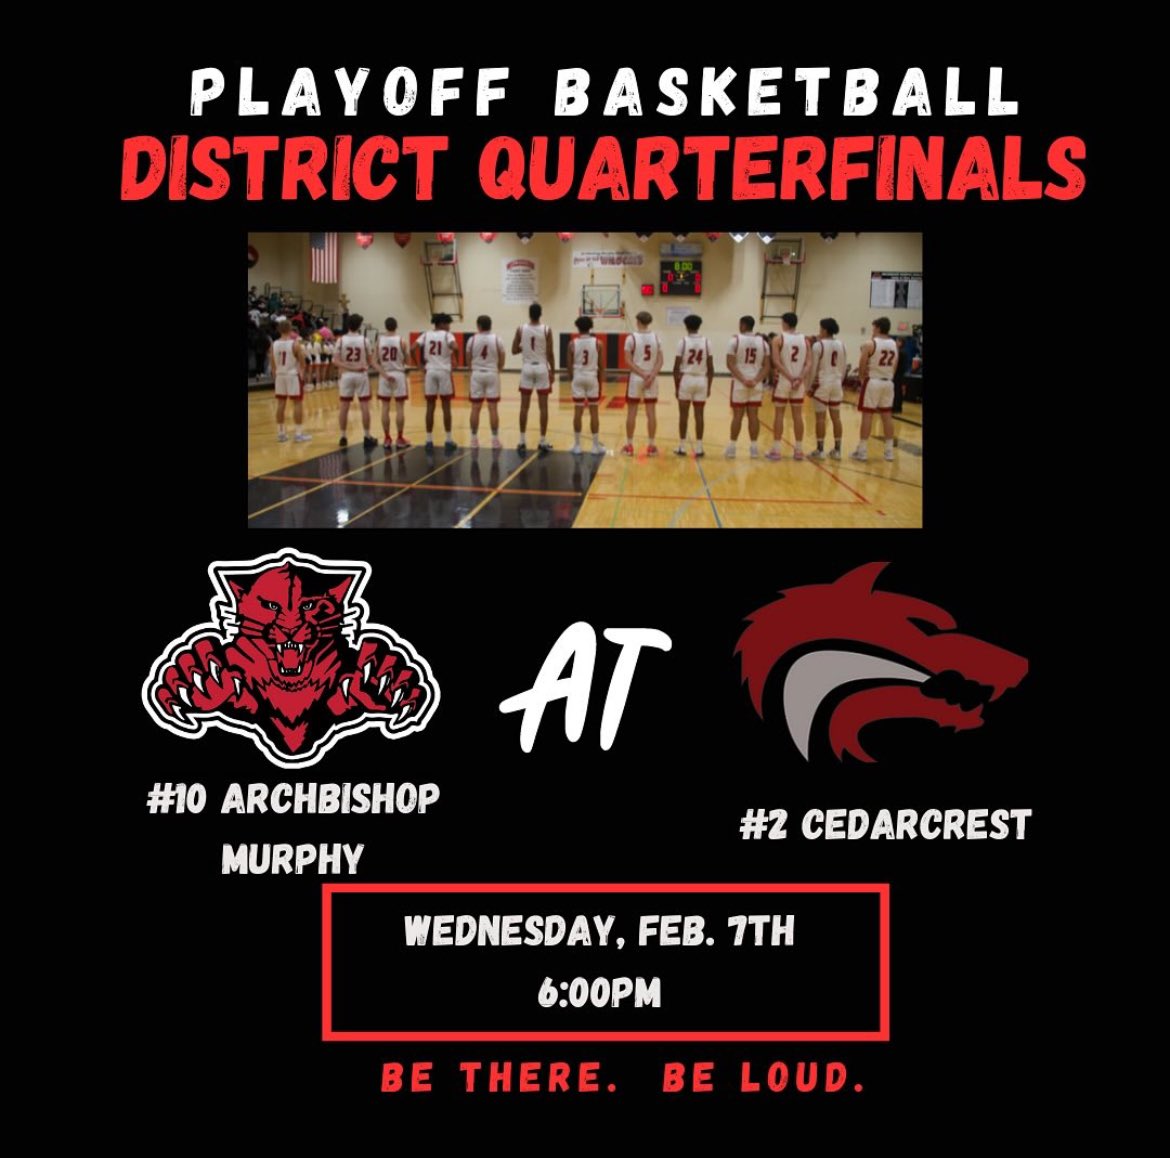 District Quarterfinals tonight @ Cedarcrest!

We can’t wait to get over there and tip it at 6:00pm.

GO CATS!